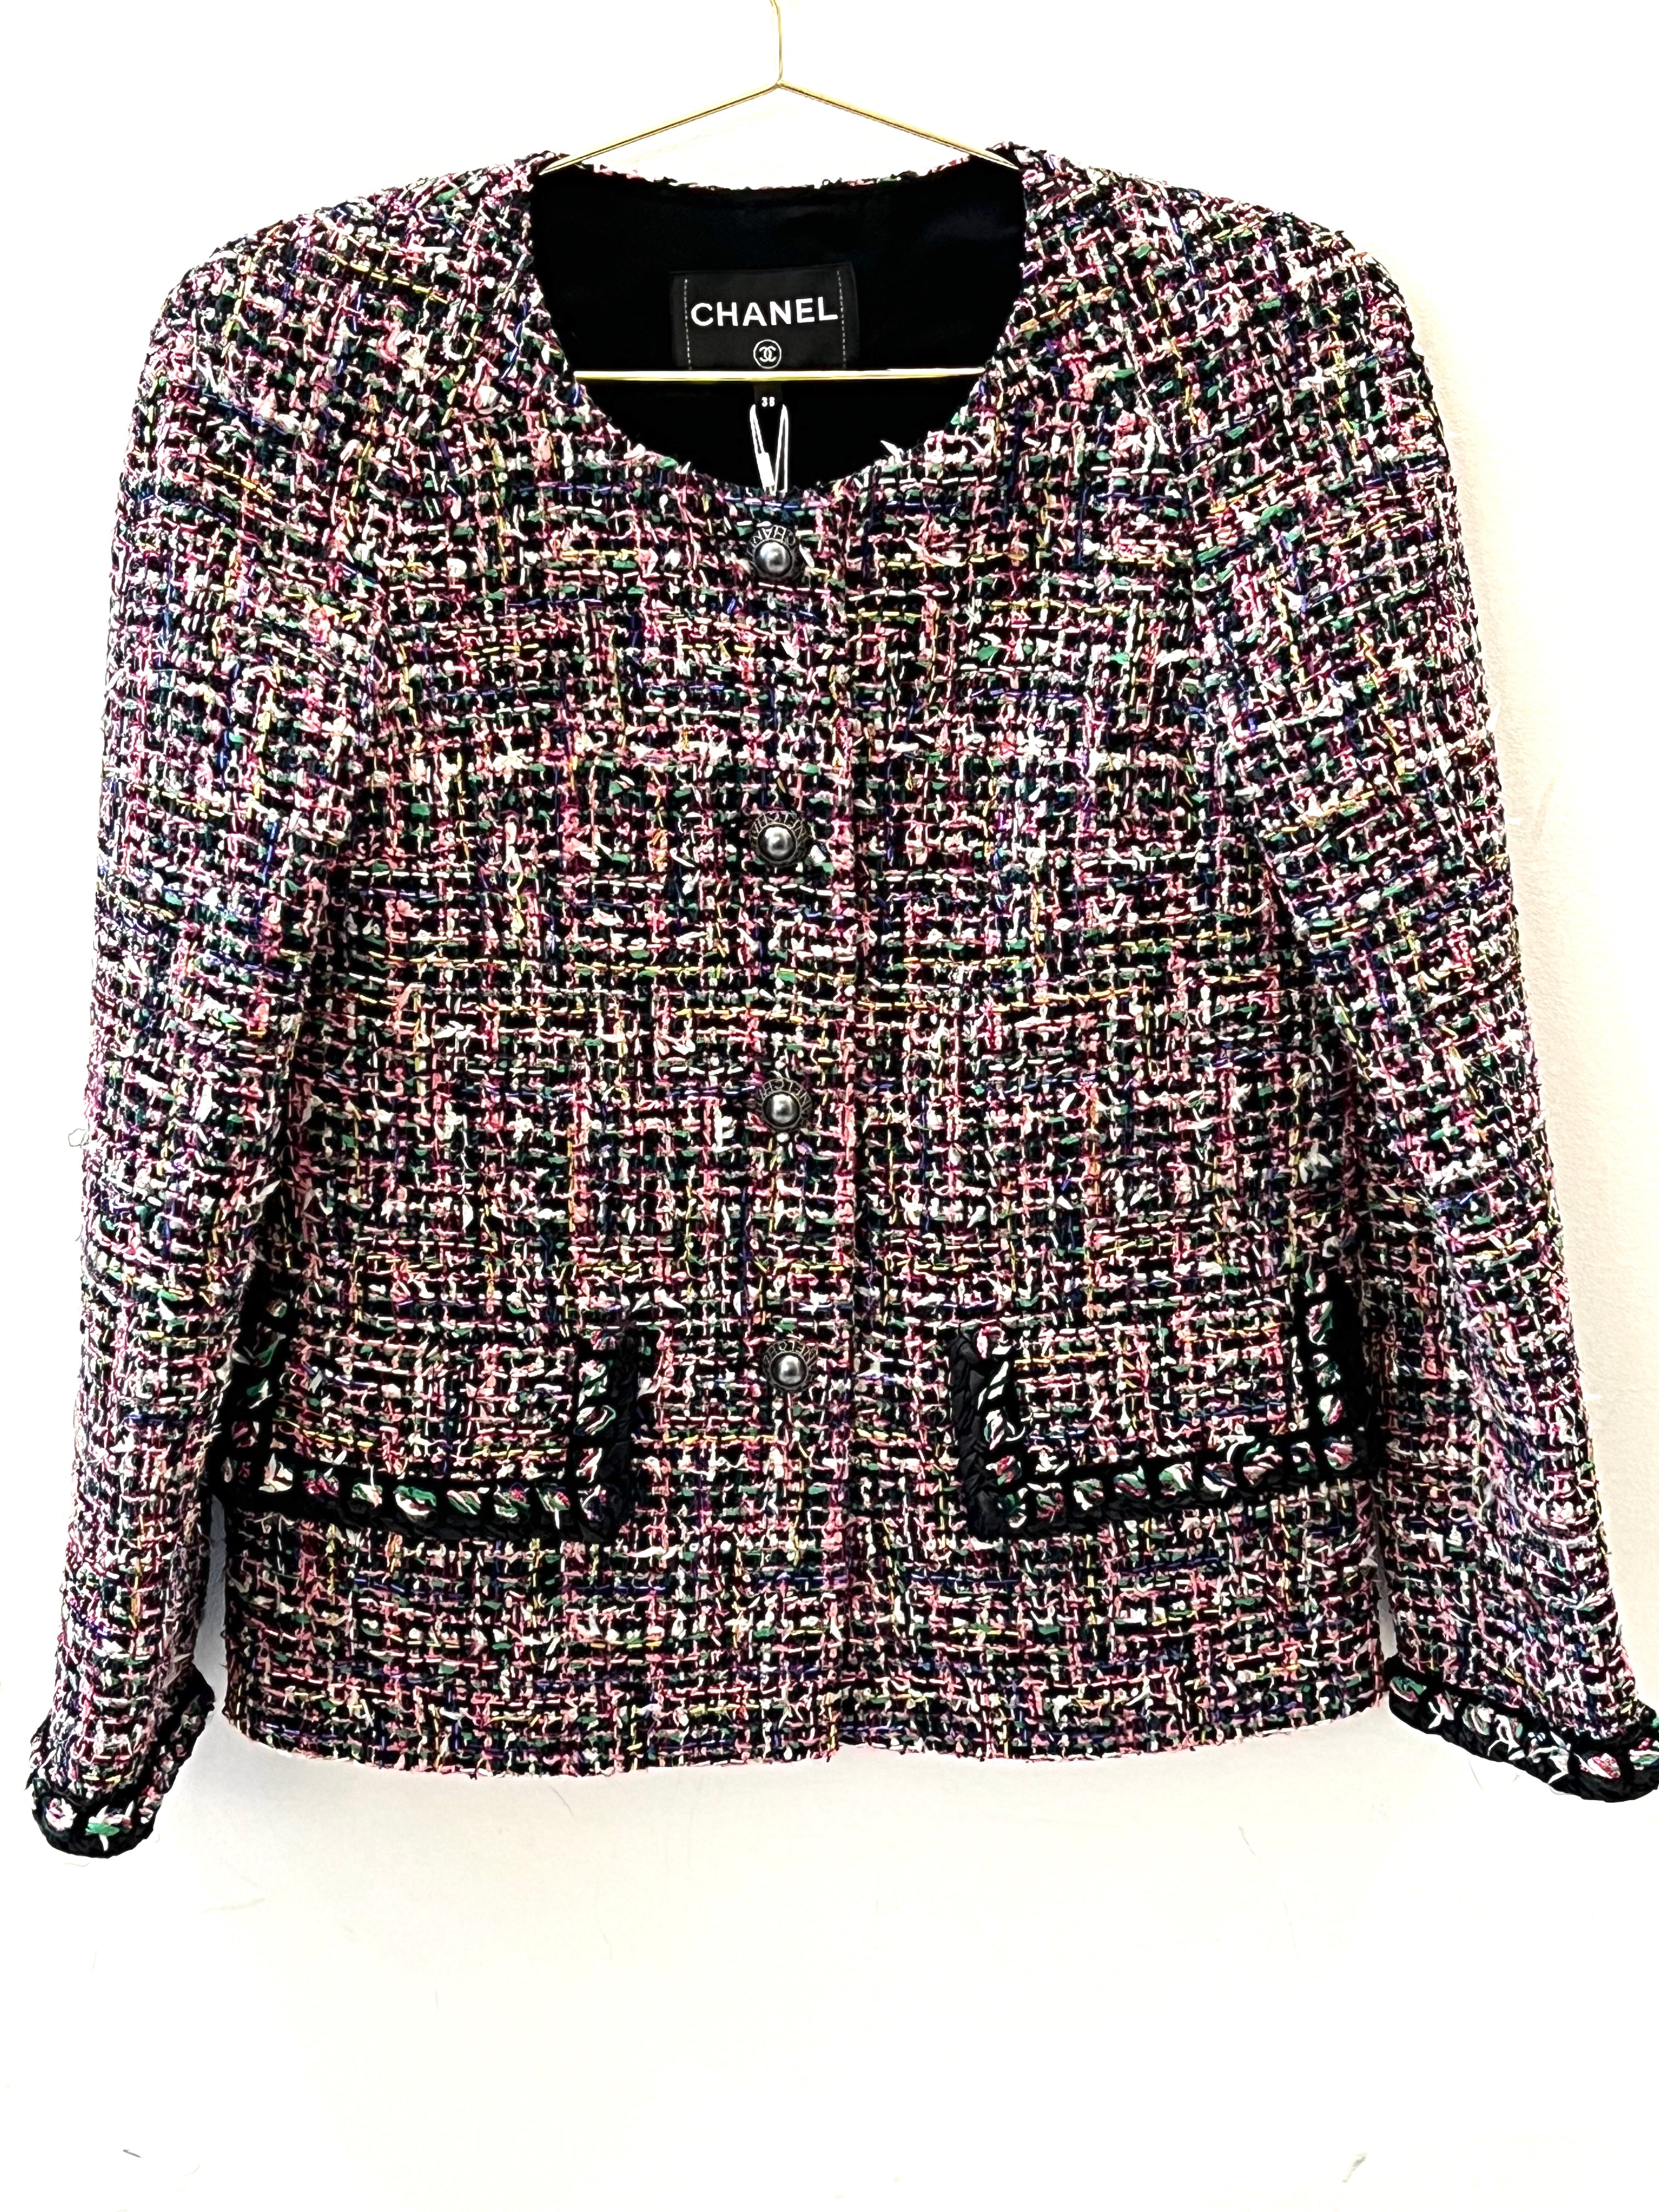 Chanel - Authenticated Dress - Tweed Black Plain for Women, Good Condition